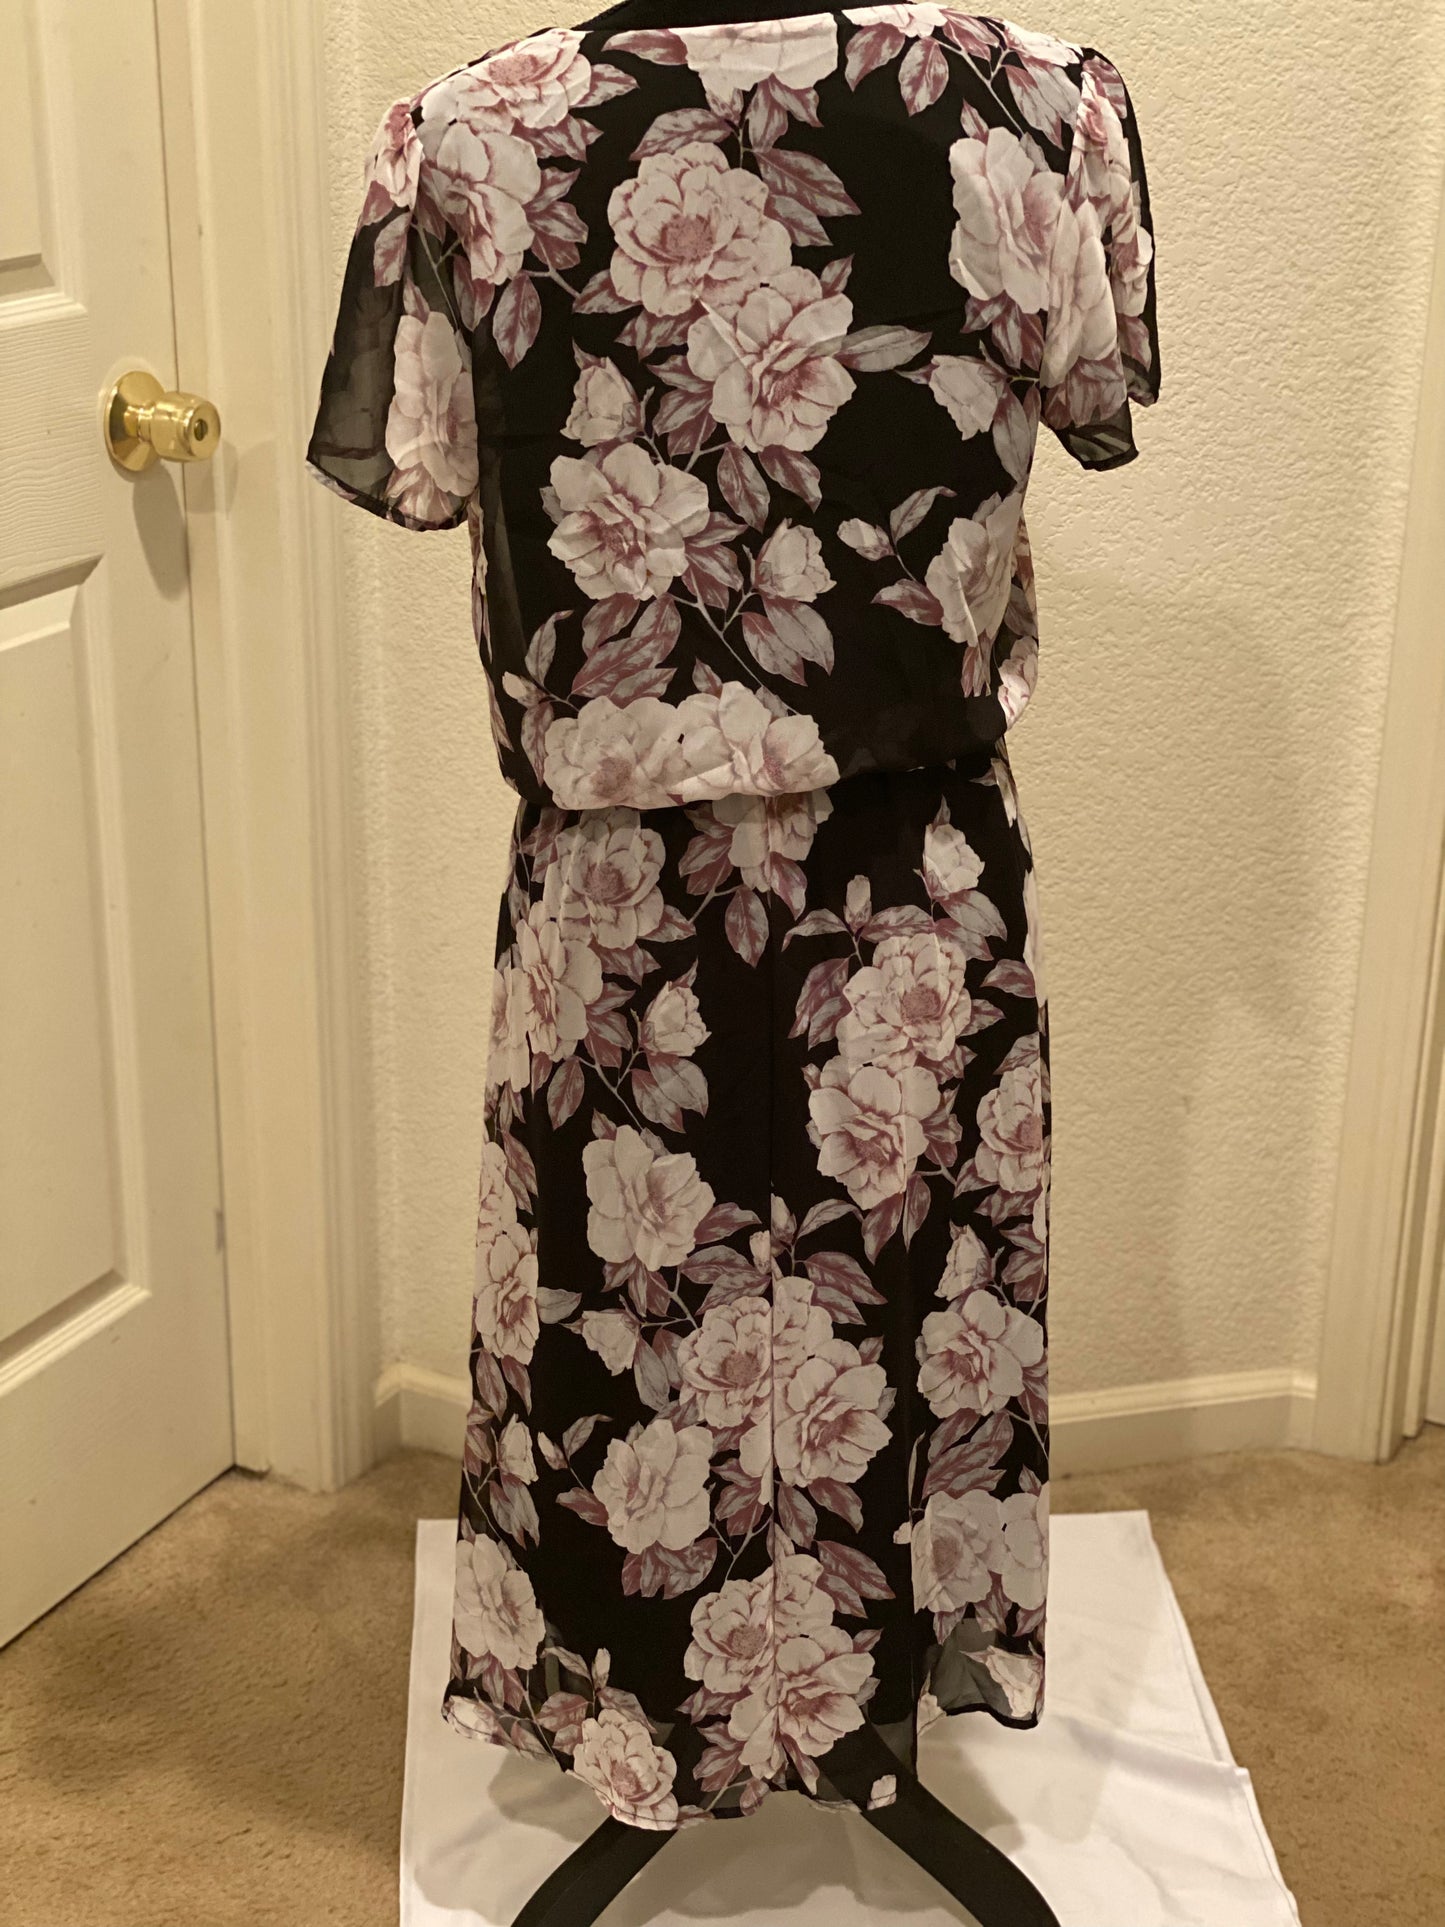 Connected Apparel Floral Dress, US Size 8